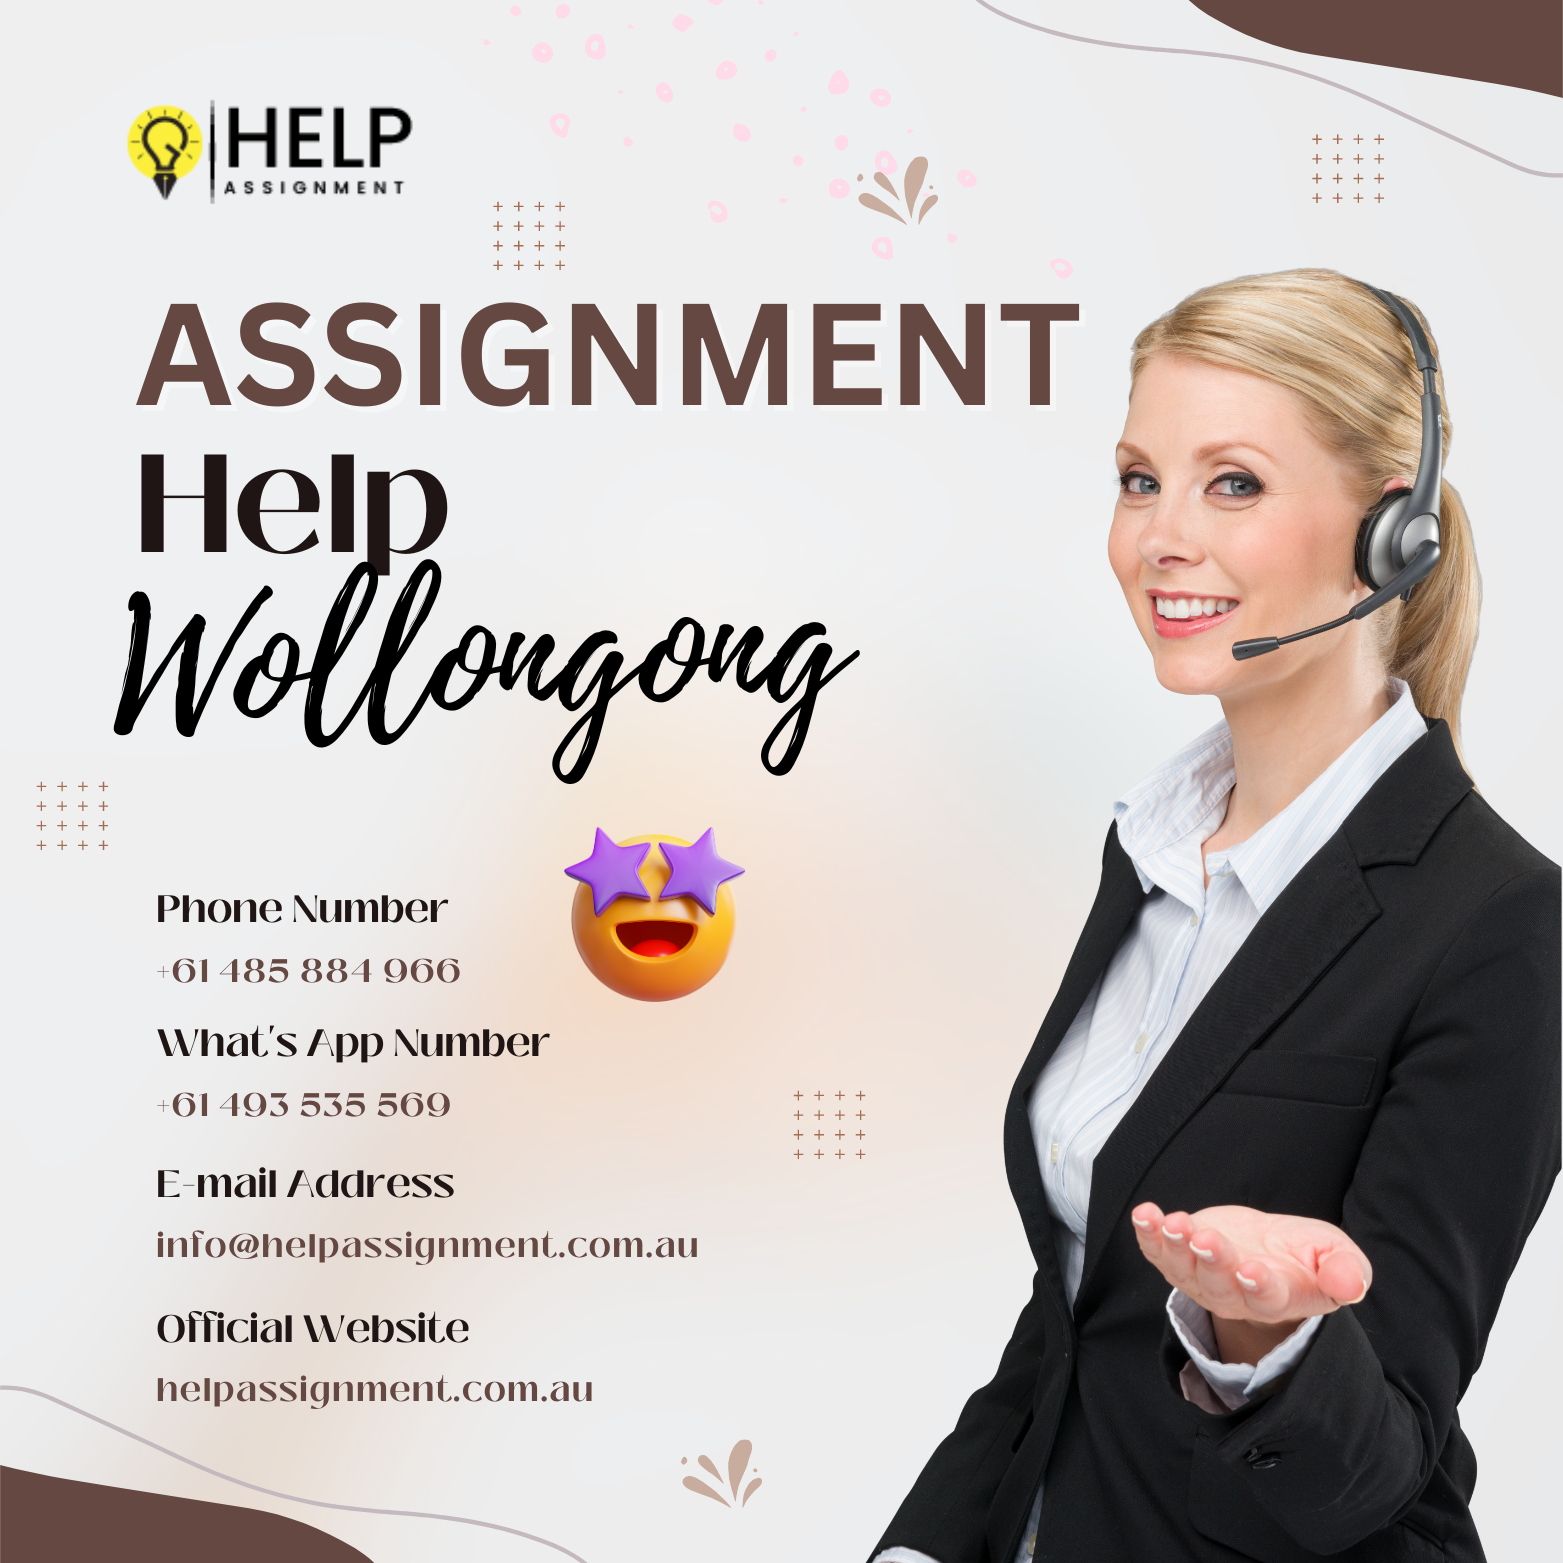 Get Top Notch Assignment Help Melbourne At One Click